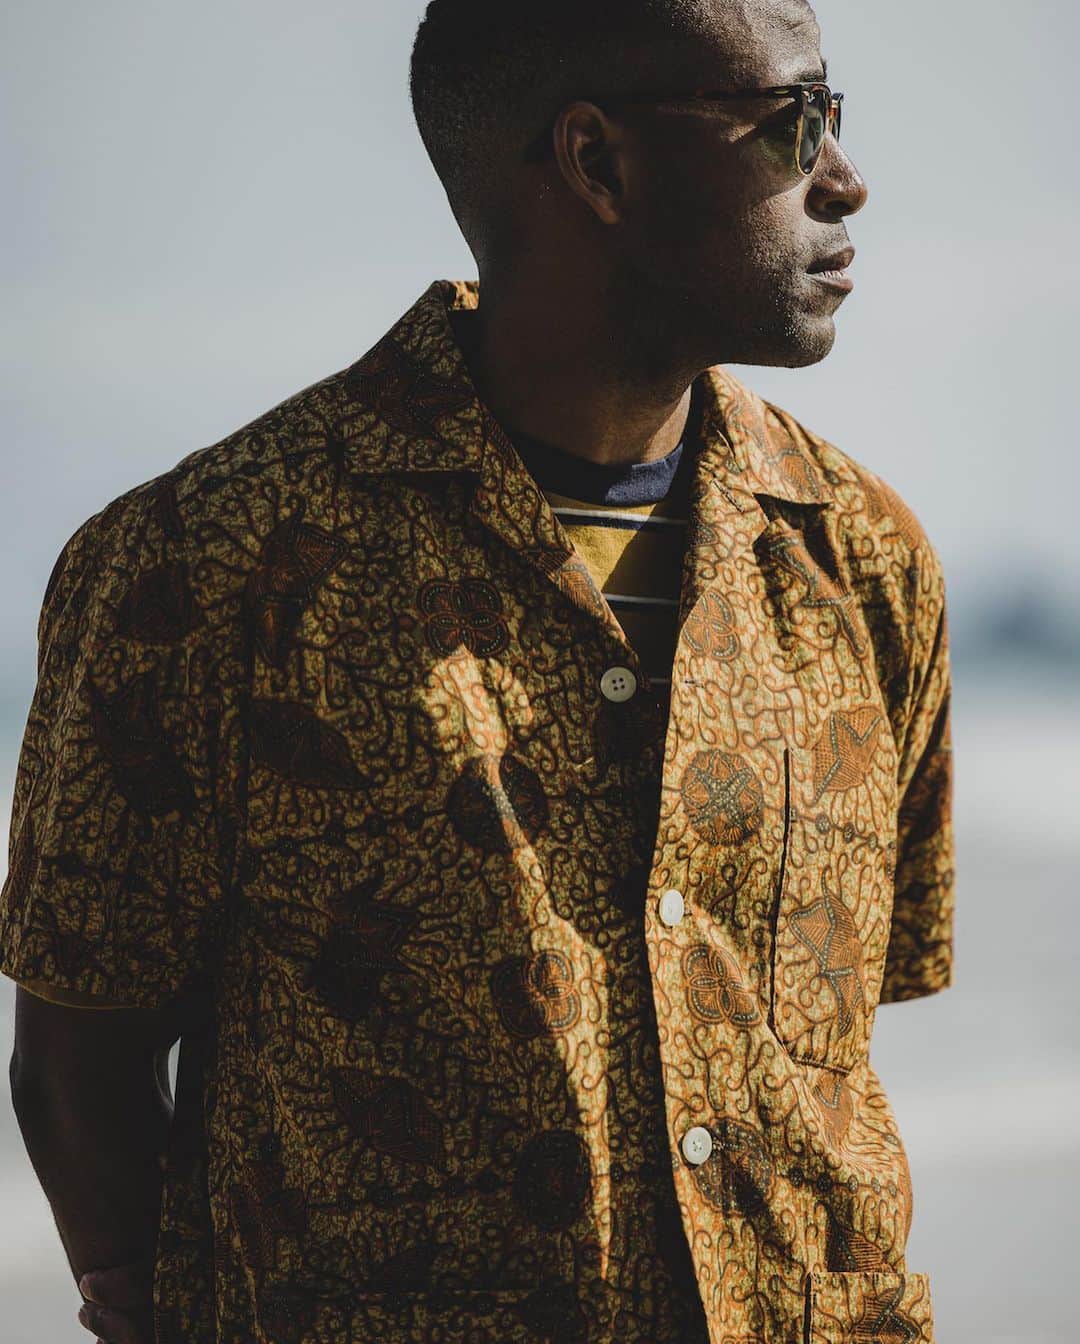 BEAMS+さんのインスタグラム写真 - (BEAMS+Instagram)「. Comfortable fit and sophisticated style, BEAMS PLUS classic beachwear. ---------- ●Beach Shirt Jacket Cotton Rayon Print Batik Print A modern take on the beach shirt that was popular in the 1960s. It features large buttons, an open collar, and patch pockets at the hem, eliminating the original design's pile lining to create a lightweight piece. The chest patch pocket is adjusted to fit vertically-oriented eyewear. Made from a lightweight and moisture-absorbent cotton-rayon blend, perfect for hot and humid summer days.  ●MIL Athletic Shorts Mini Ripstop A military-inspired BEAMS PLUS athletic shorts. Additional pocket details were added to consider town use, including side and back pockets. The relaxed fit pattern with a wide thigh width is designed for comfort. The material is made from a highly durable mini ripstop fabric using a very fine 20-denier nylon, providing lightweight and high stretchability. The mesh lining ensures comfort during hot and humid seasons.  ●Pocket Tee Wide Stripe A classic-colored wide stripe pocket t-shirt. Made from thick uneven yarn knitted in a jersey stitch to achieve a classic fabric texture. The fabric is soft and has a pleasant touch, completed at a sewing factory in Japan.  快適な着心地と洗練されたスタイル、BEAMS PLUSのクラシックなビーチウェア。 ---------- ●Beach Shirt Jacket Cotton Rayon Print Batik Print 1960年代に流行したビーチシャツを現代的ににアレンジ。大きめのボタンやオープンカラー、裾に付くパッチポケットのディテールが特徴で、オリジナルデザインに付いていたパイル地のライニングを省き、軽い一枚で仕上げています。胸のパッチポケットはアイウェアが収まる縦長のサイズにアレンジ。 素材レーヨンコットンの軽く吸湿性の良い素材を使用。温度と湿度の高い夏場で大活躍。  ●MIL Athletic Shorts Mini Ripstop ミリタリーモチーフの〈BEAMS PLUS〉アスレチックショーツ。オリジナルデザインには無いポケットディテールを追加。をタウンユースでの着用を考慮、サイドポケットとバックポケットを加えています。広いワタリ幅を持たせたリラックス感のあるパターンを使用。 素材使いは、非常に細い20デニールナイロンを使用した引き裂き強度の高いミニリップストップ生地を使用。軽量性・高いストレッチ性を併せ持つ素材。裏地にはメッシュ素材を使用し、気温と湿度が高いシーズンを快適に過ごすことが可能です。  ● Pocket Tee Wide Stripe クラシックな配色とワイドピッチのストライプポケットTシャツ。 太番手のムラ糸を天竺編みし、クラシックな生地感を表現。日本国内の縫製工場で仕上げたソフトでふくらみのある肌触りの良い生地です。 . @beams_plus @beams_plus_harajuku @beams_plus_yurakucho #beamsplus」7月27日 20時00分 - beams_plus_harajuku